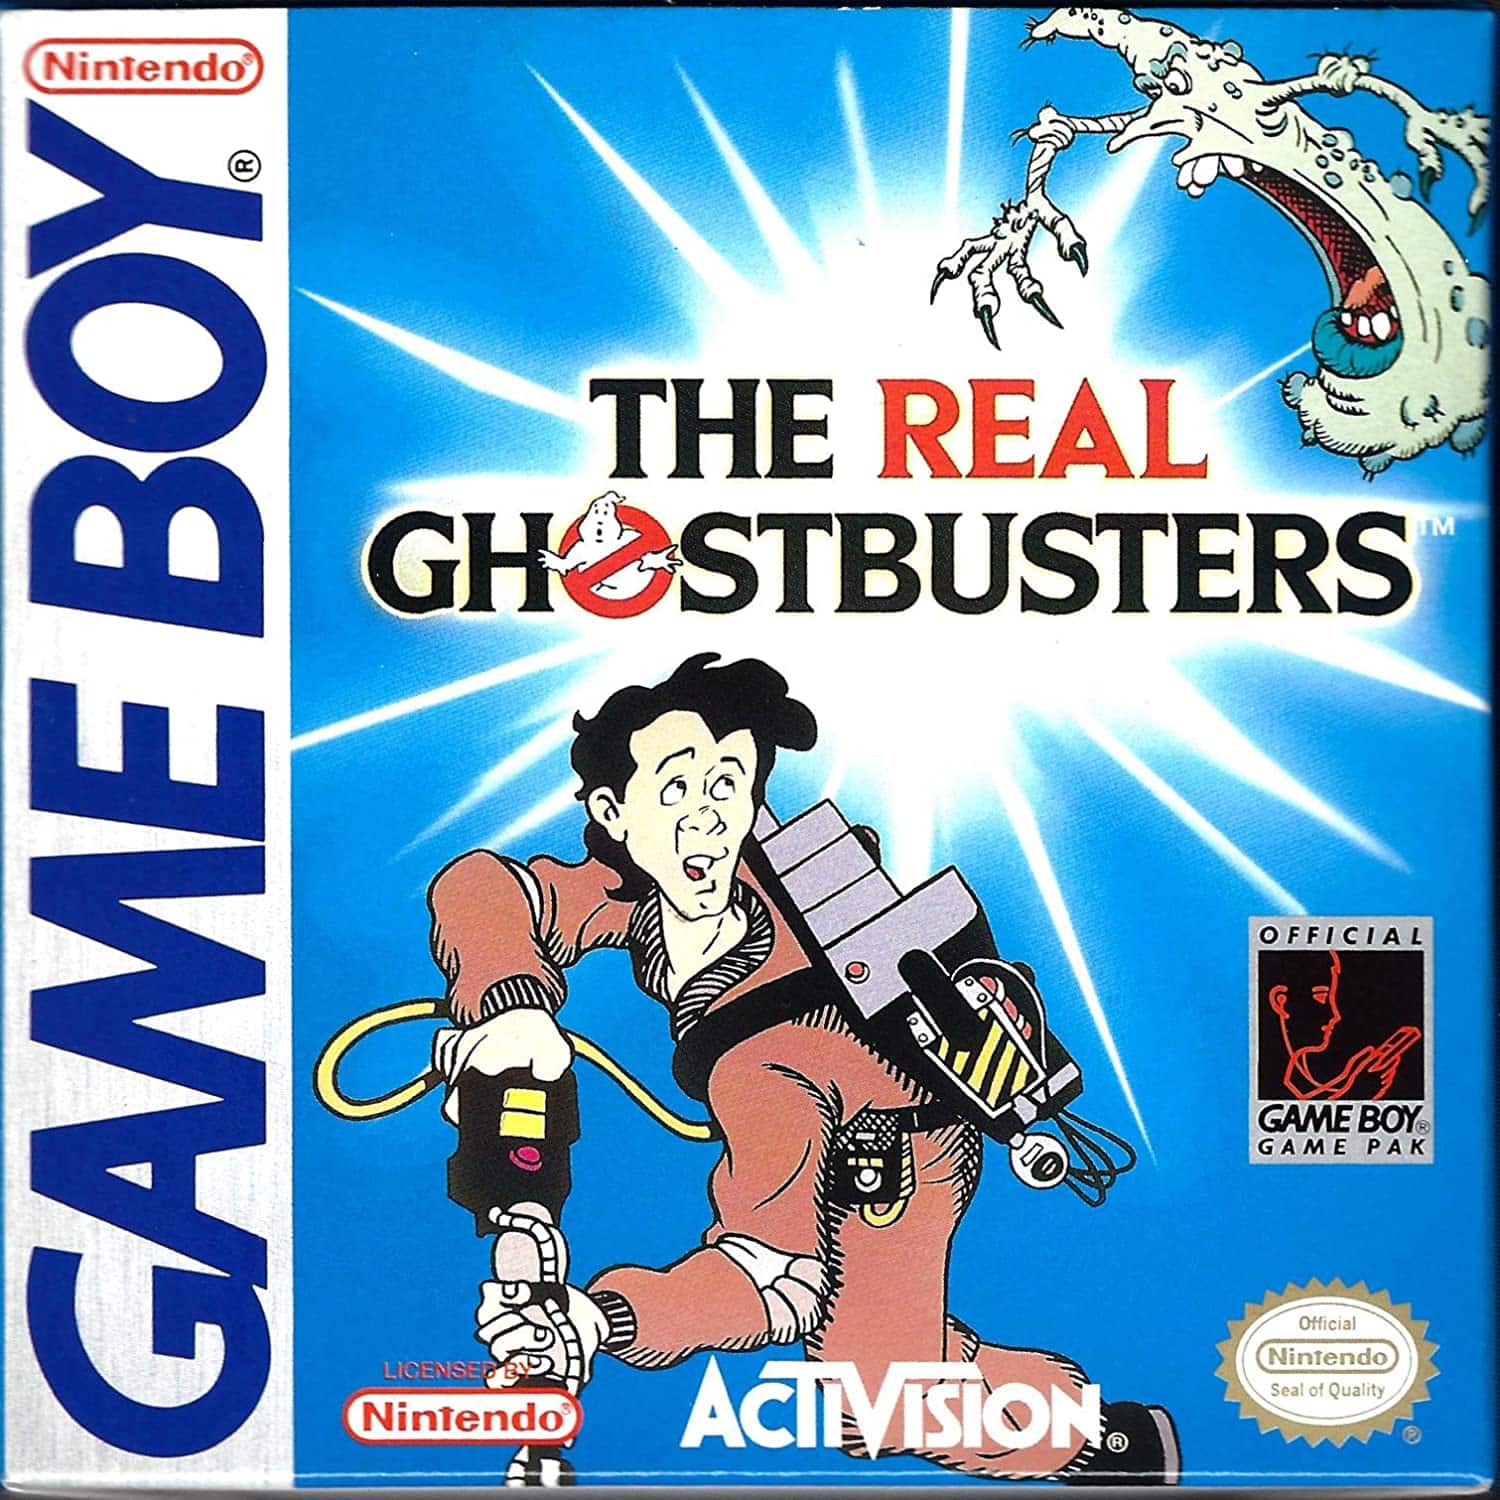 The Real Ghostbusters player count stats